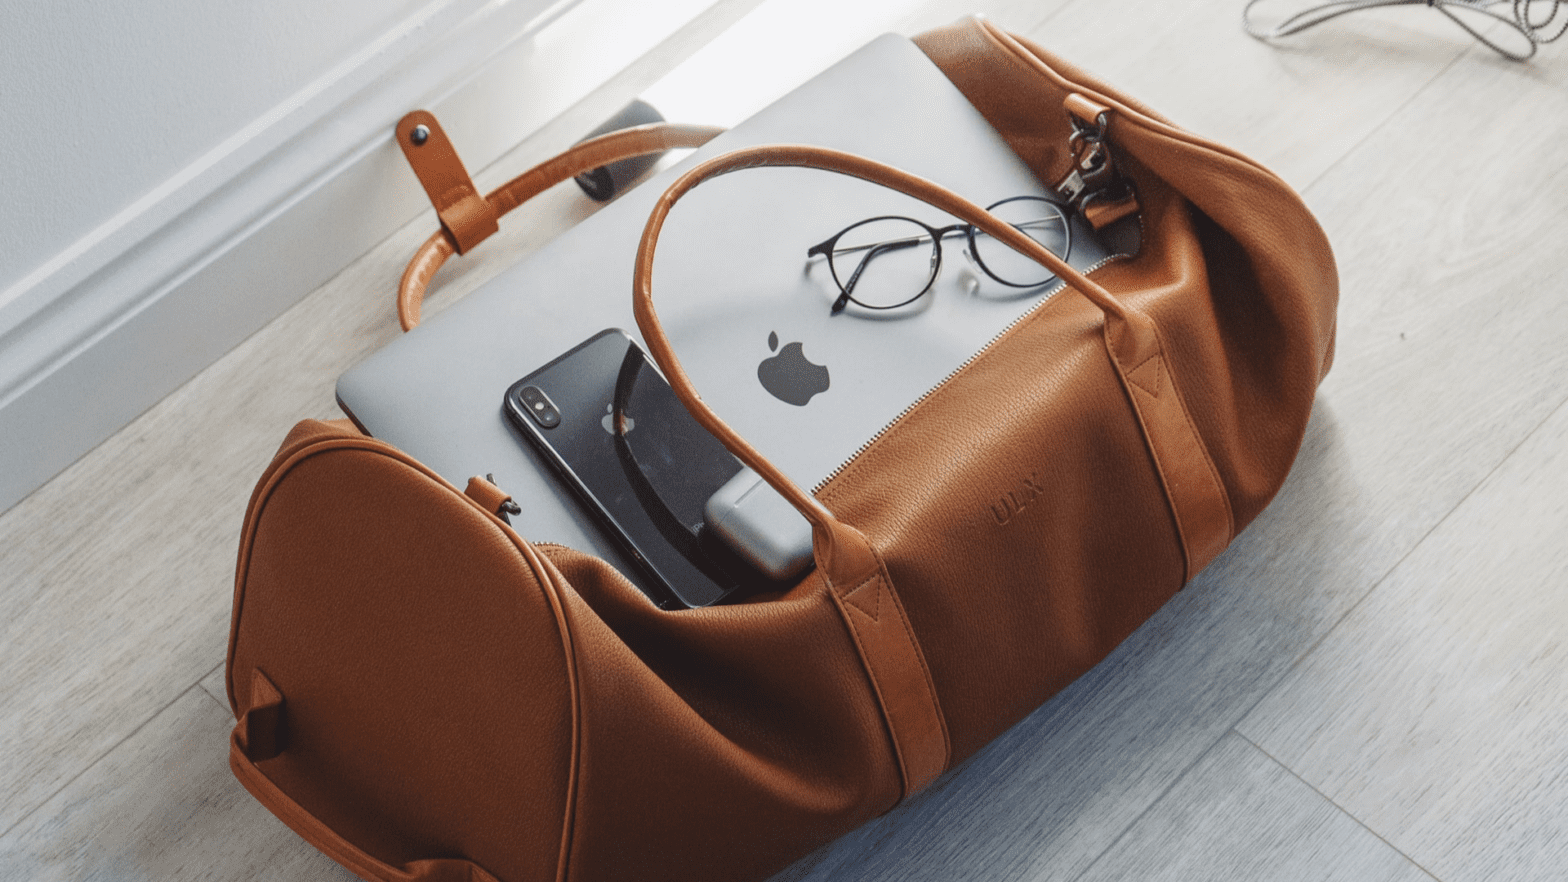 Duffel bag with phone and laptop